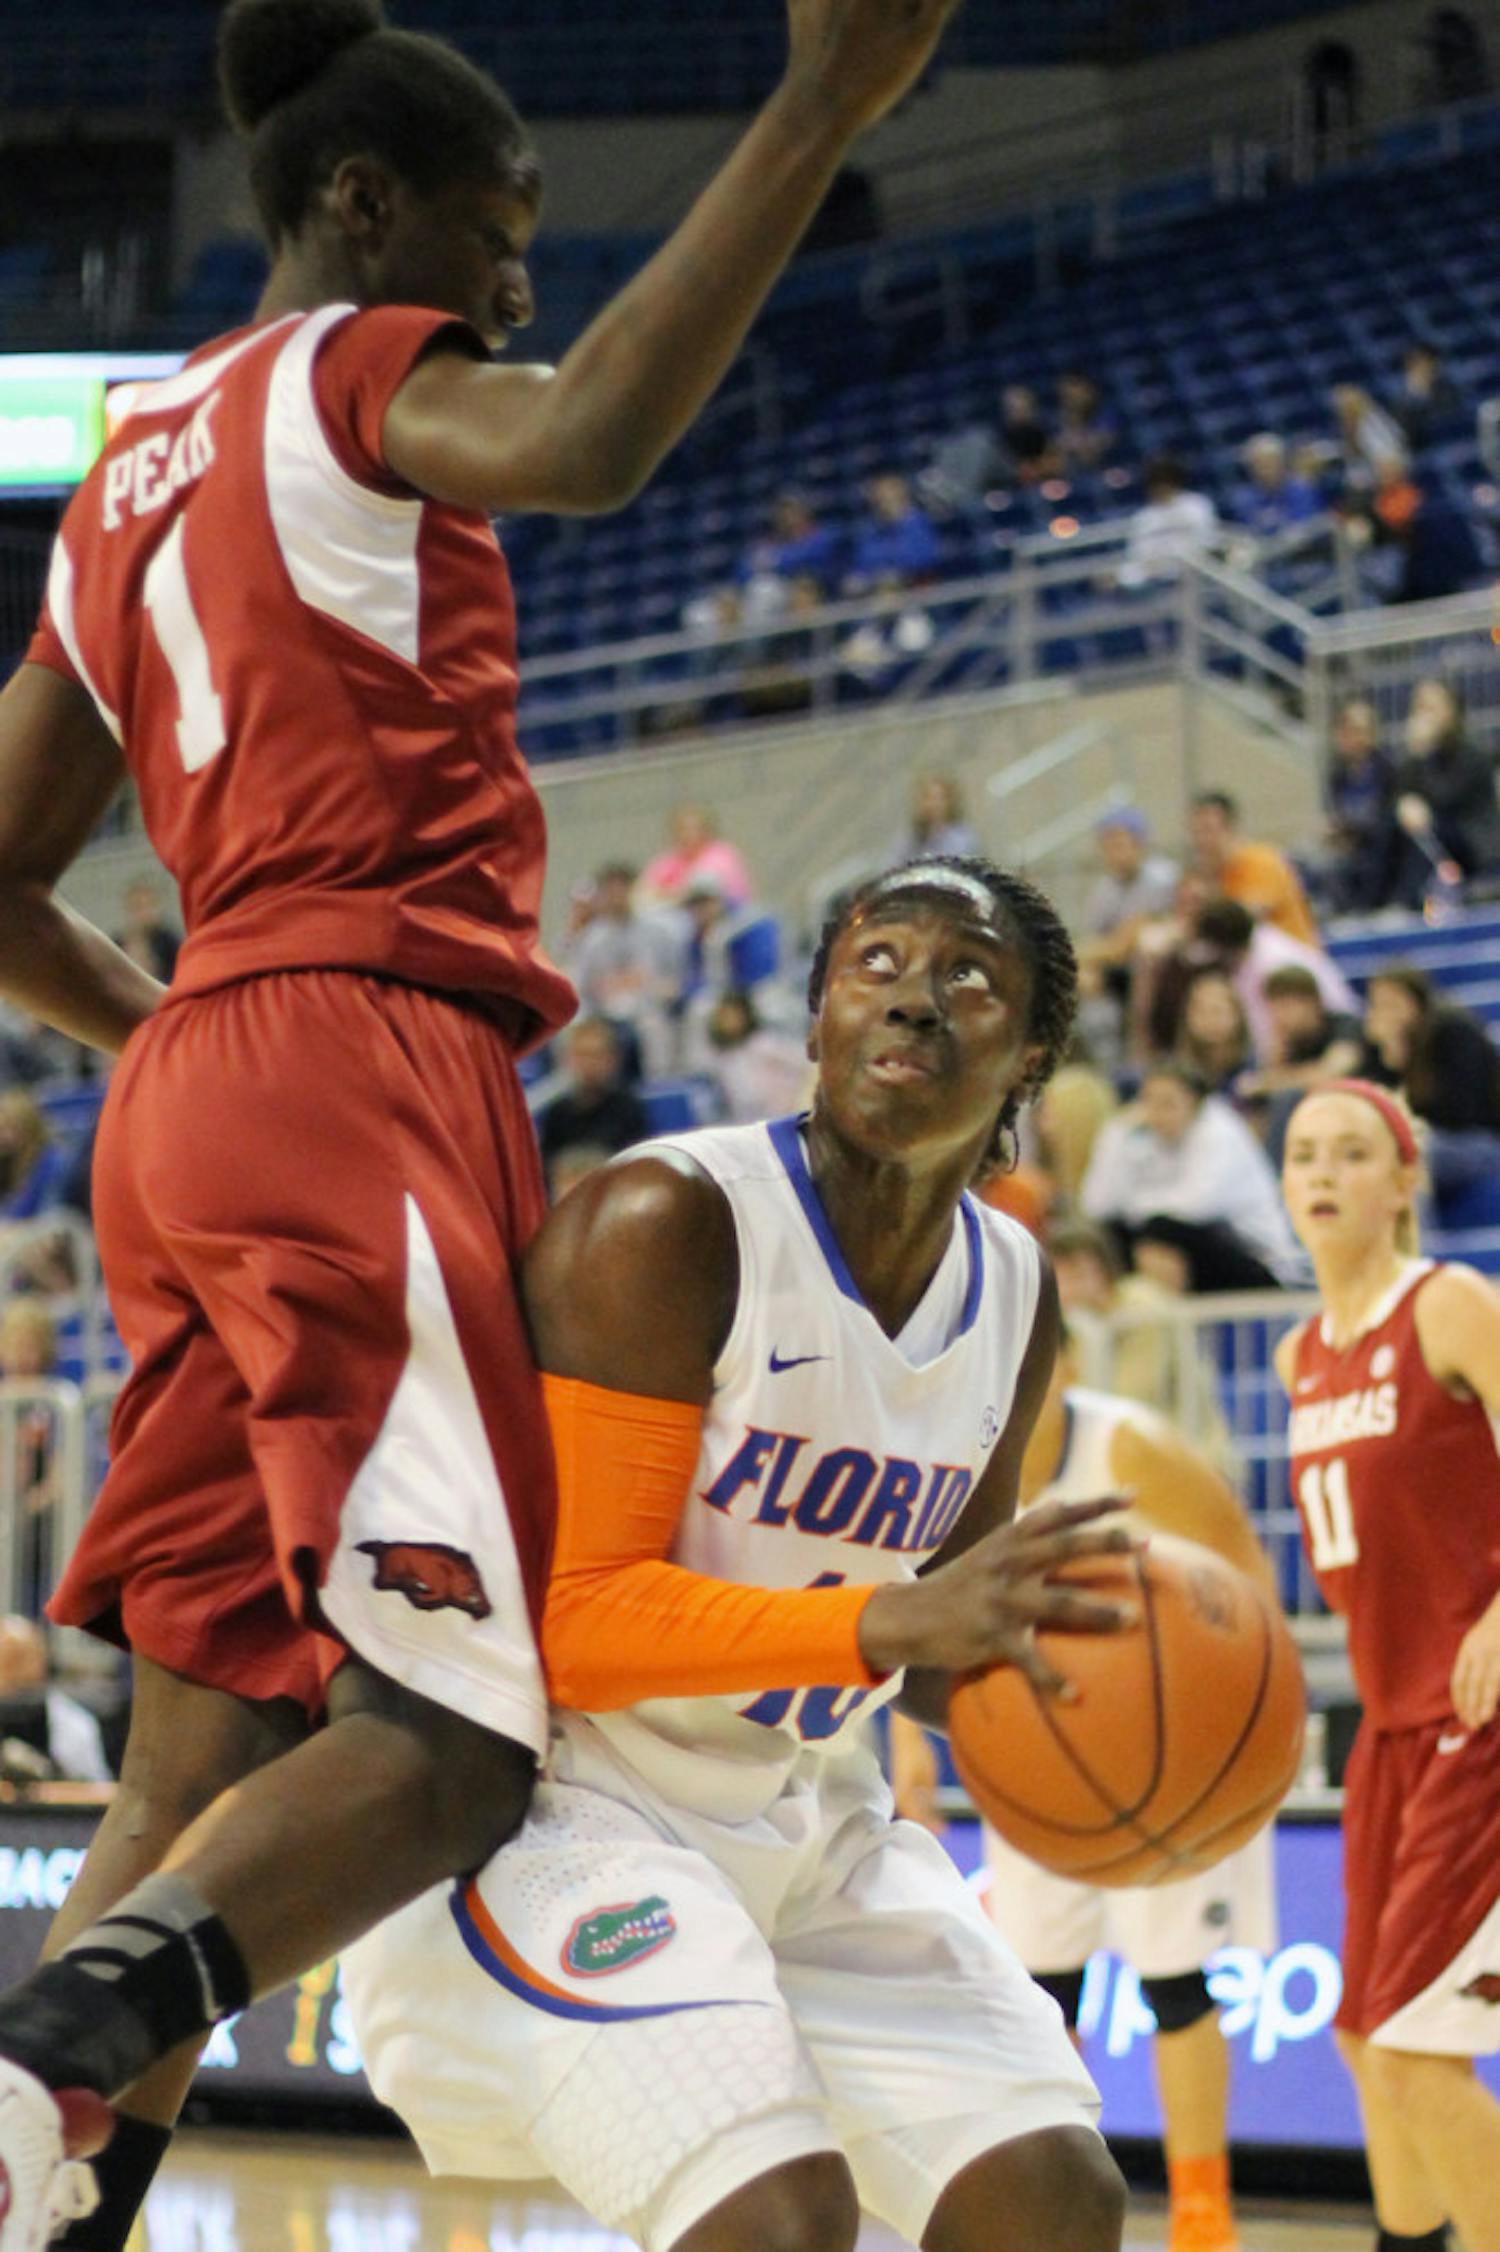 Guard Jaterra Bonds drives to the basket during Florida’s 69-58 win against Arkansas on Feb. 28 in the O'Connell Center.